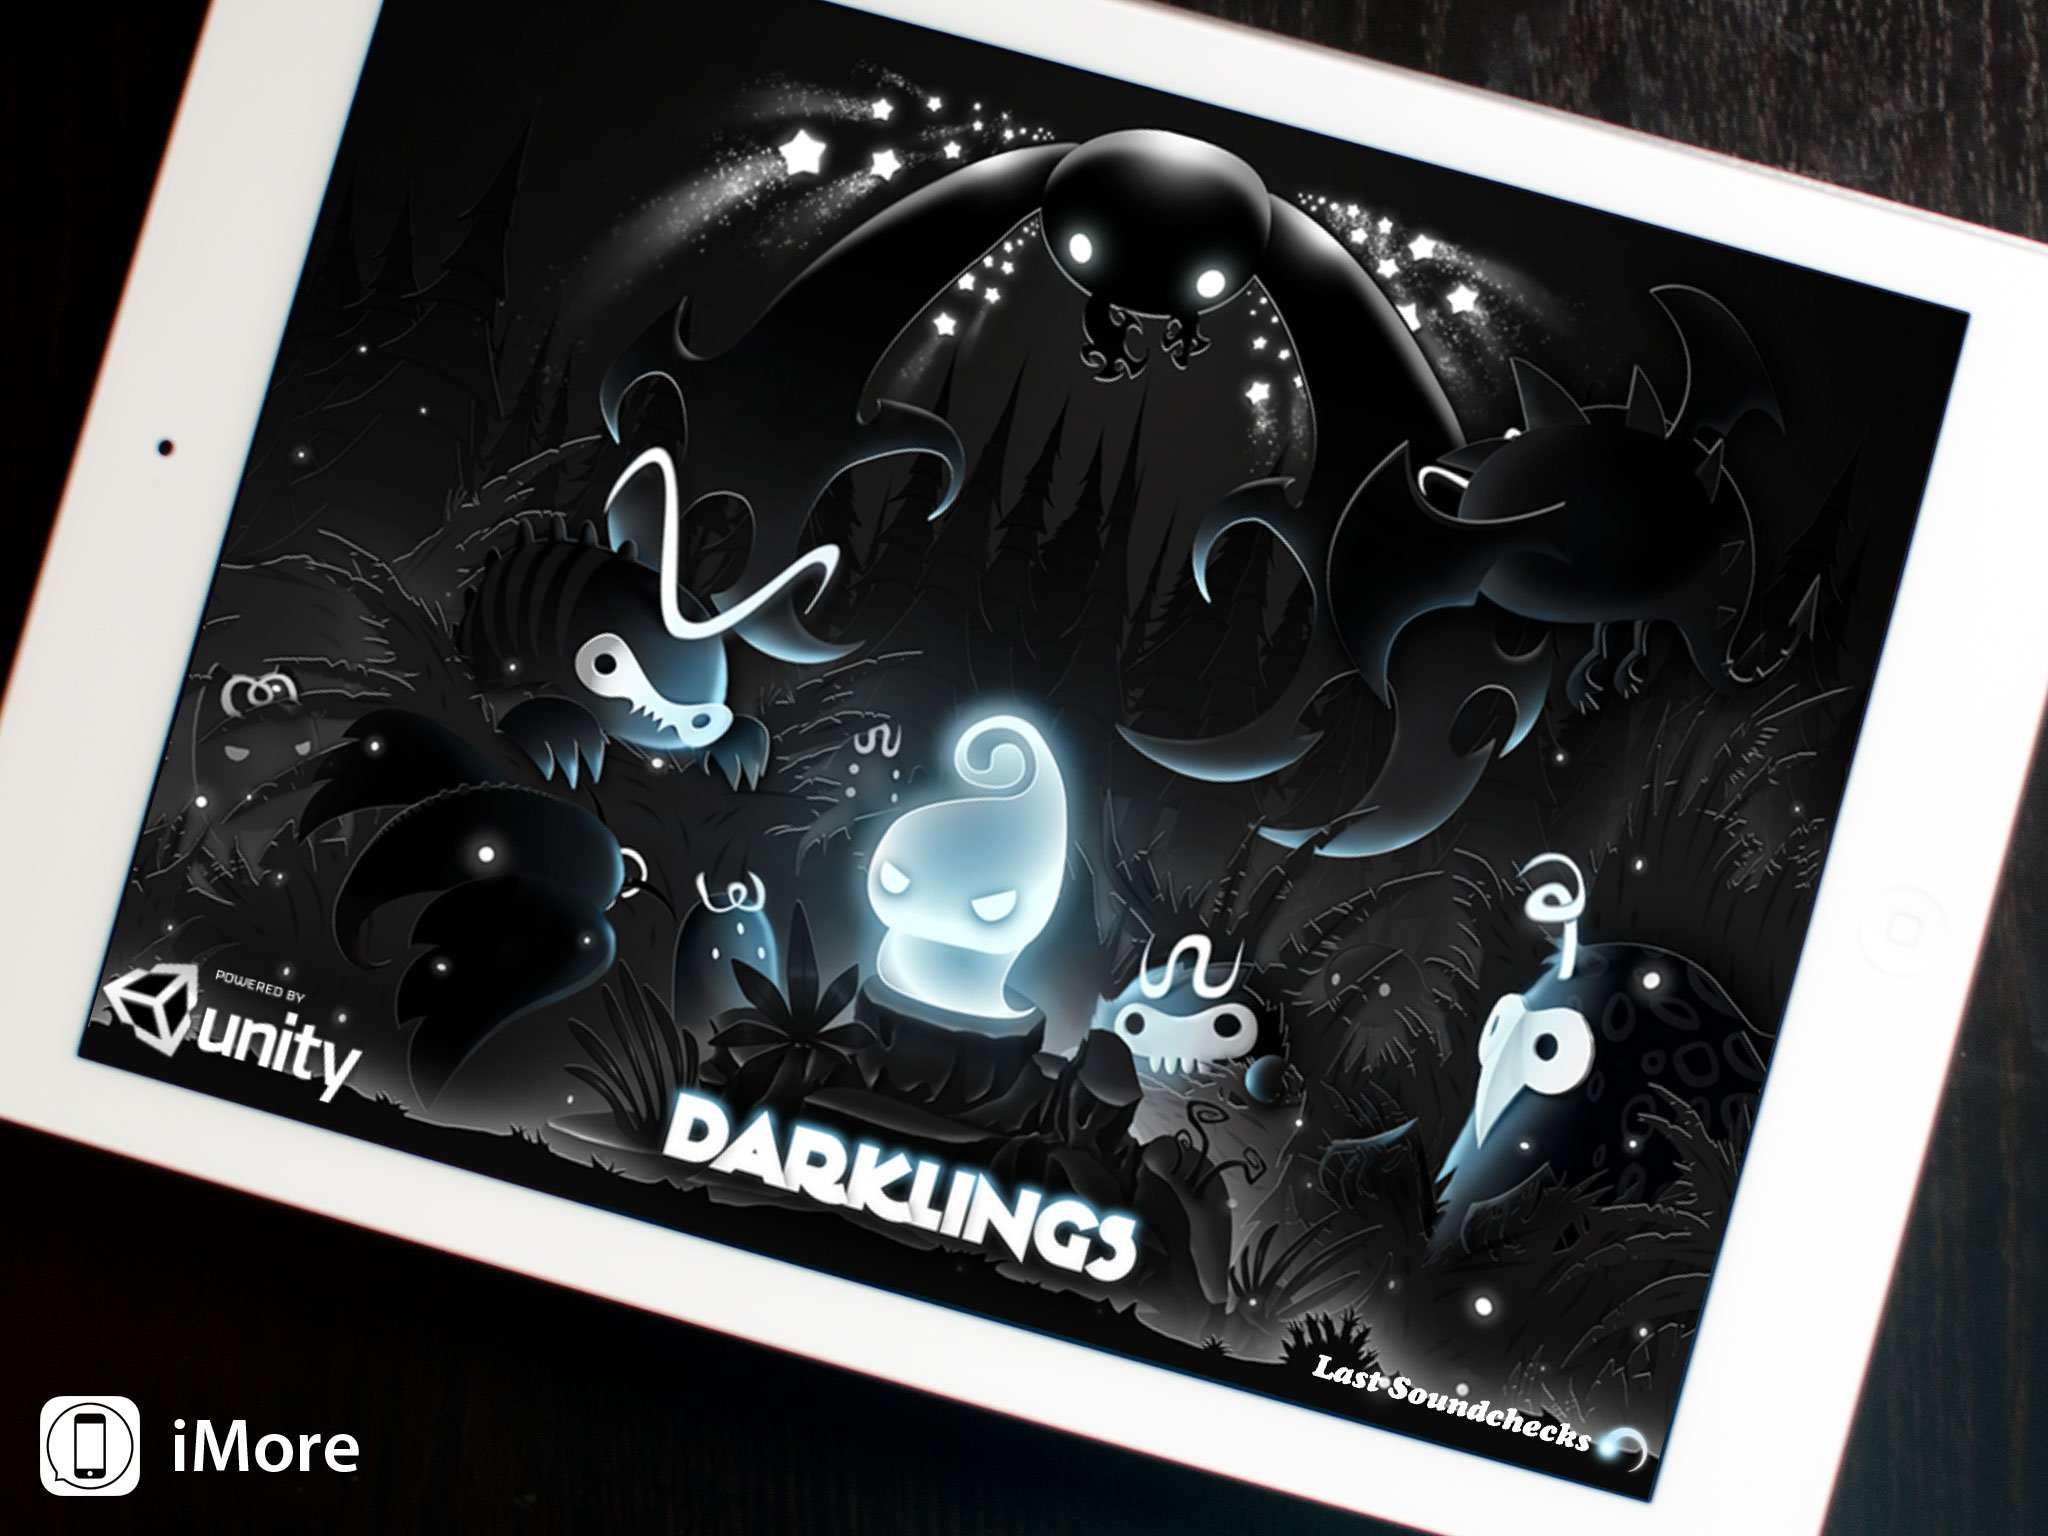 Darklings for iOS: Beautiful graphics combined with easy, yet addictive gameplay for all ages